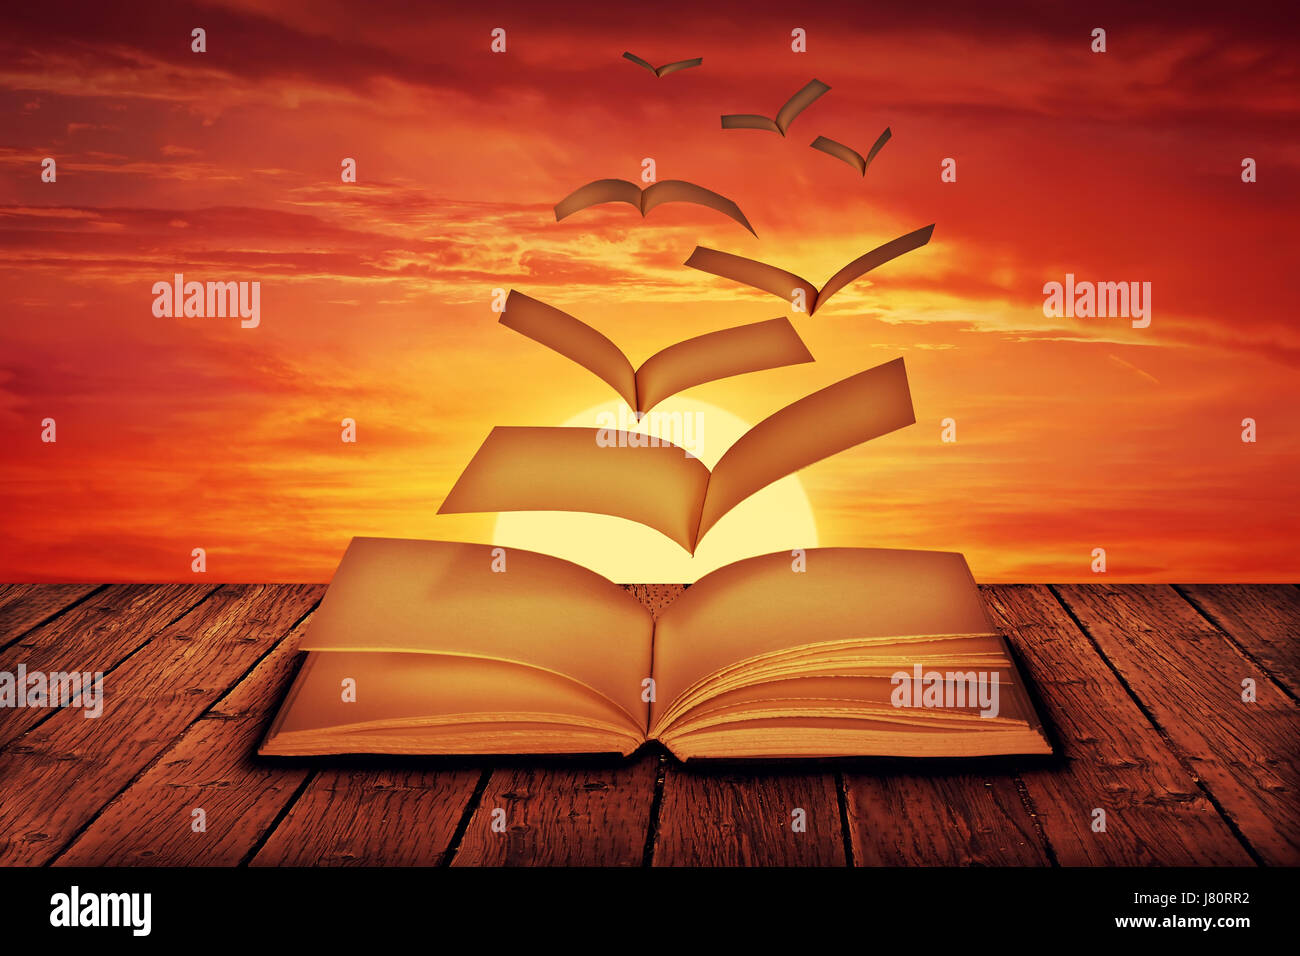 Unwritten white pages flying out of a book and transform into magic birds, escape on a sunset background. Stock Photo